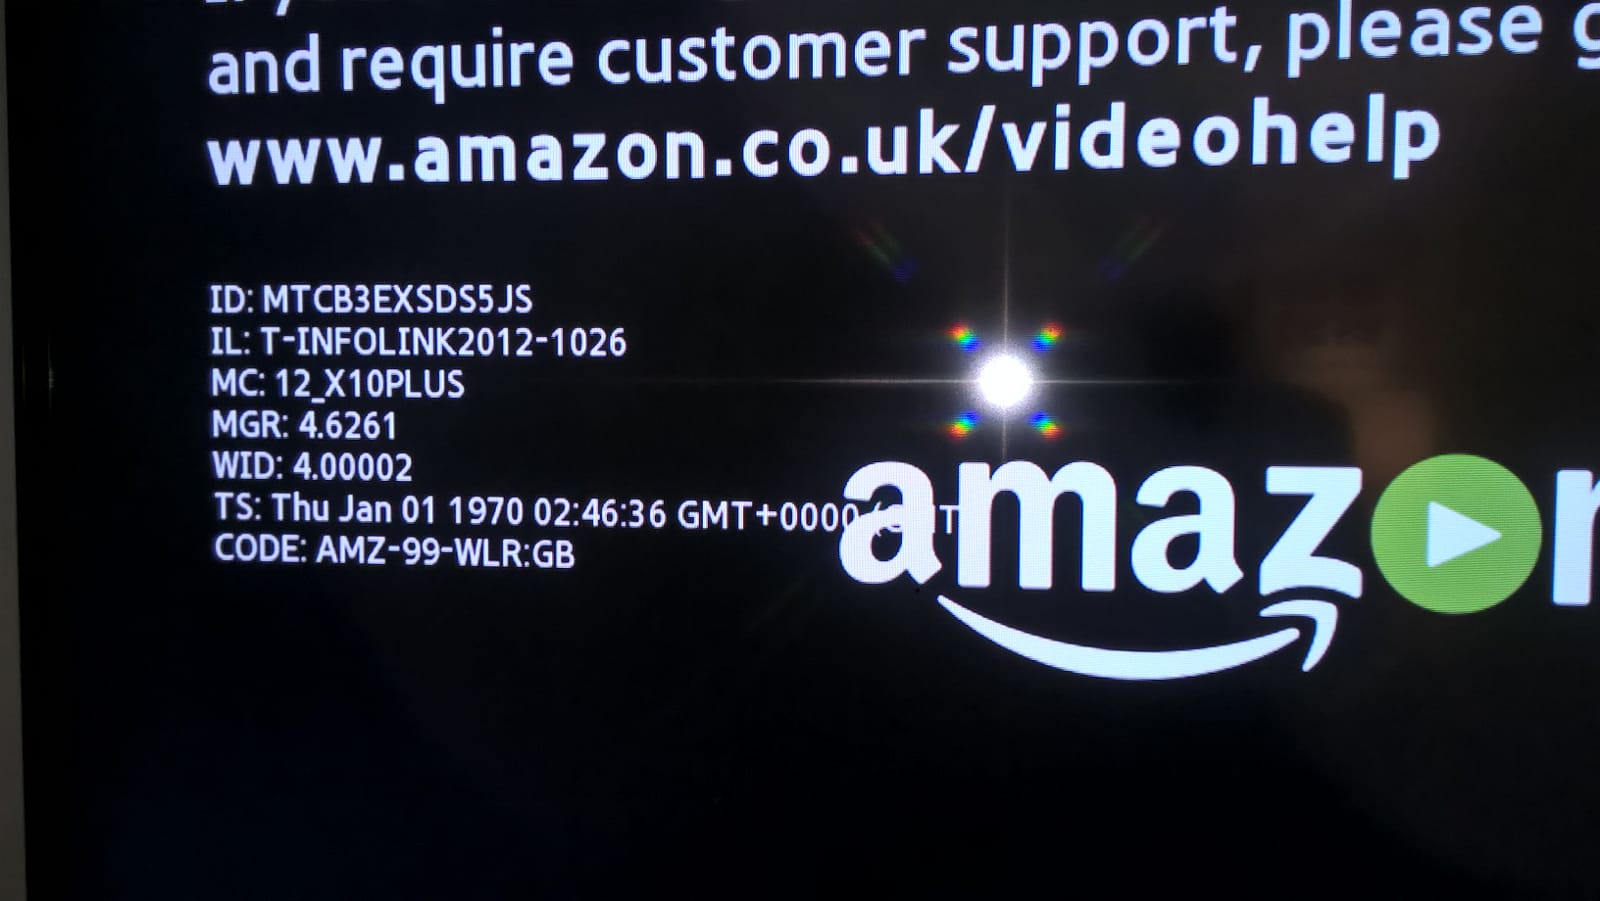 Amazon Prime Video TV app stopped working after Jan 2019 update - Samsung  Community